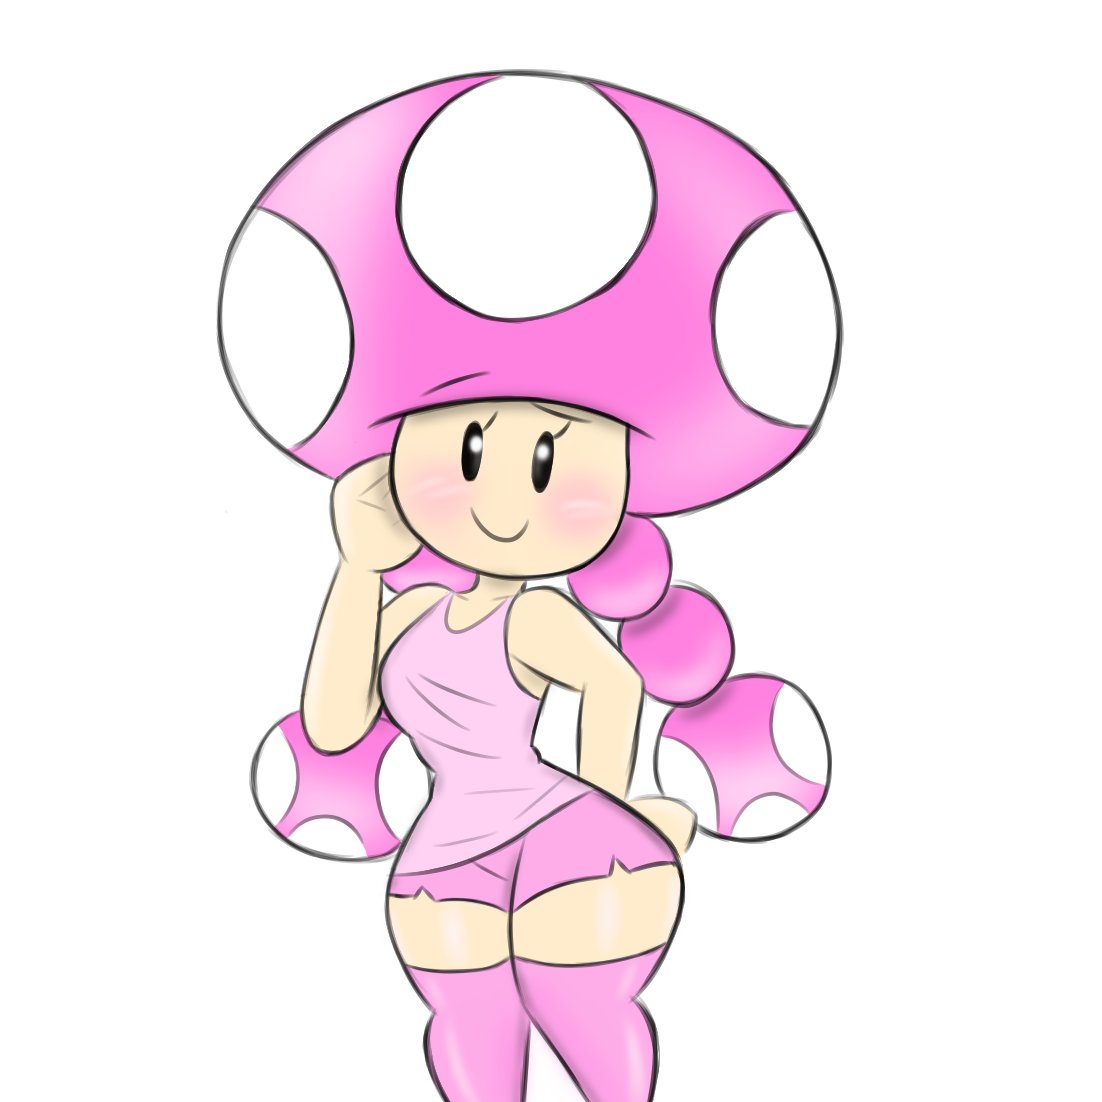 Twygz On Twitter Here S The Toadette Drawing For Tonight Fuckin Love This P...